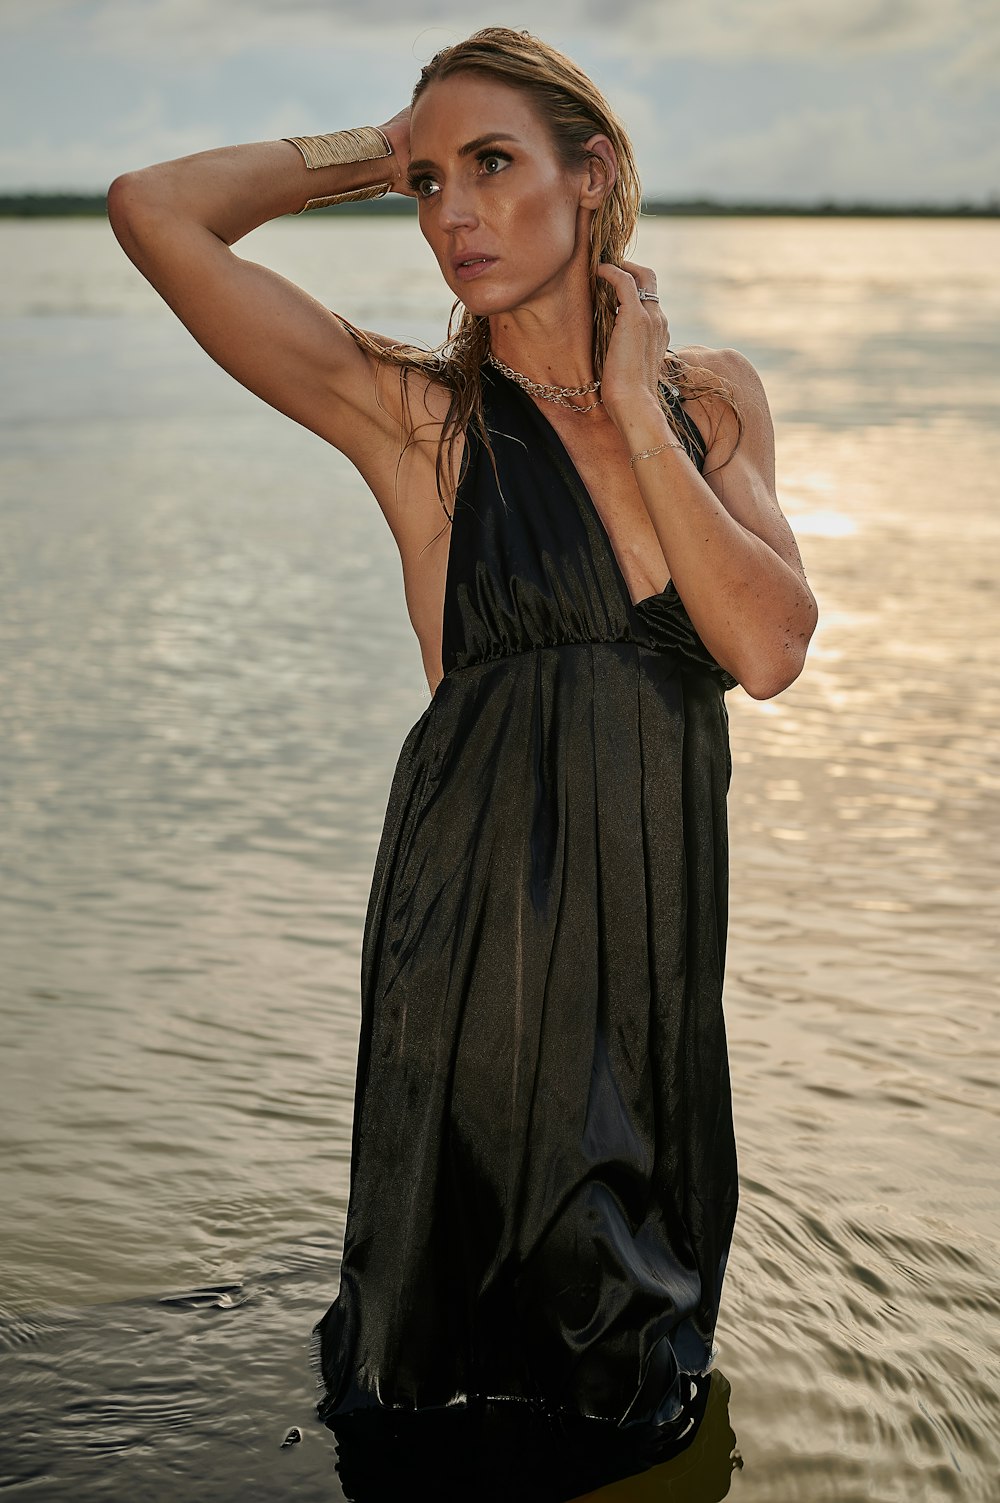 a woman in a black dress standing in front of a body of water